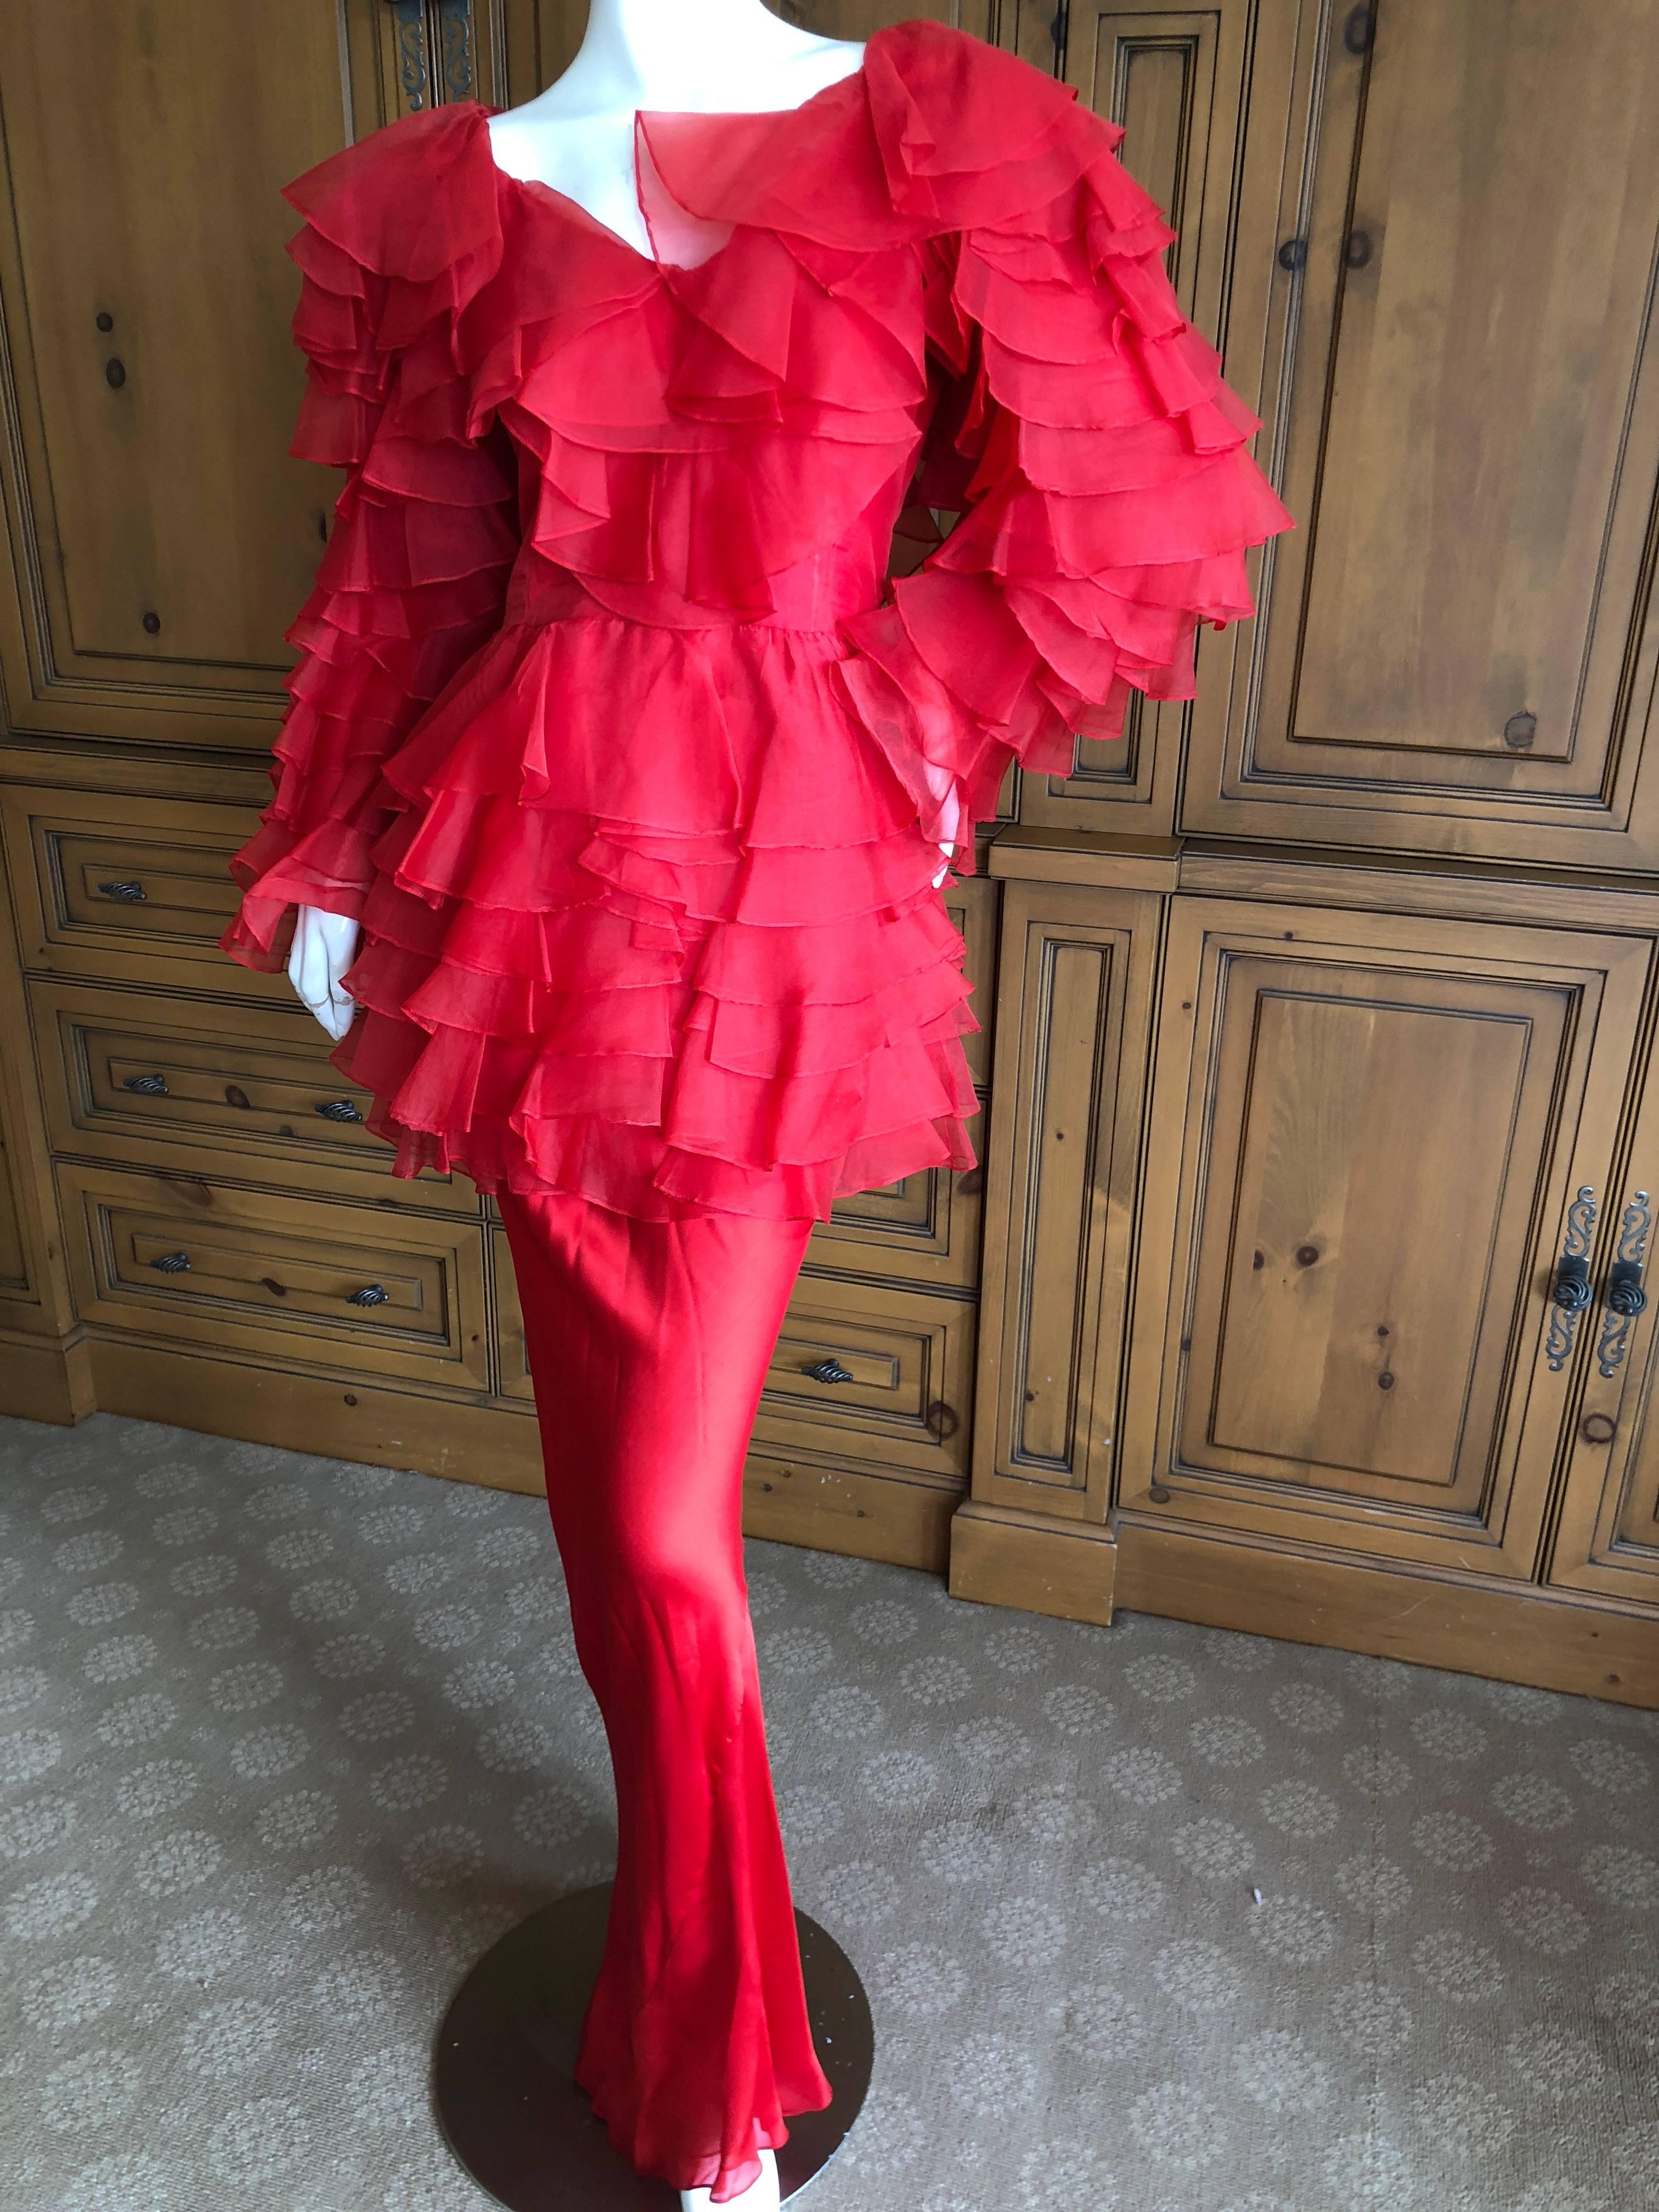 Cardinali 1970s Scarlet Red Ruffled Top and Bias Cut Silk Skirt with Fascinator For Sale 1